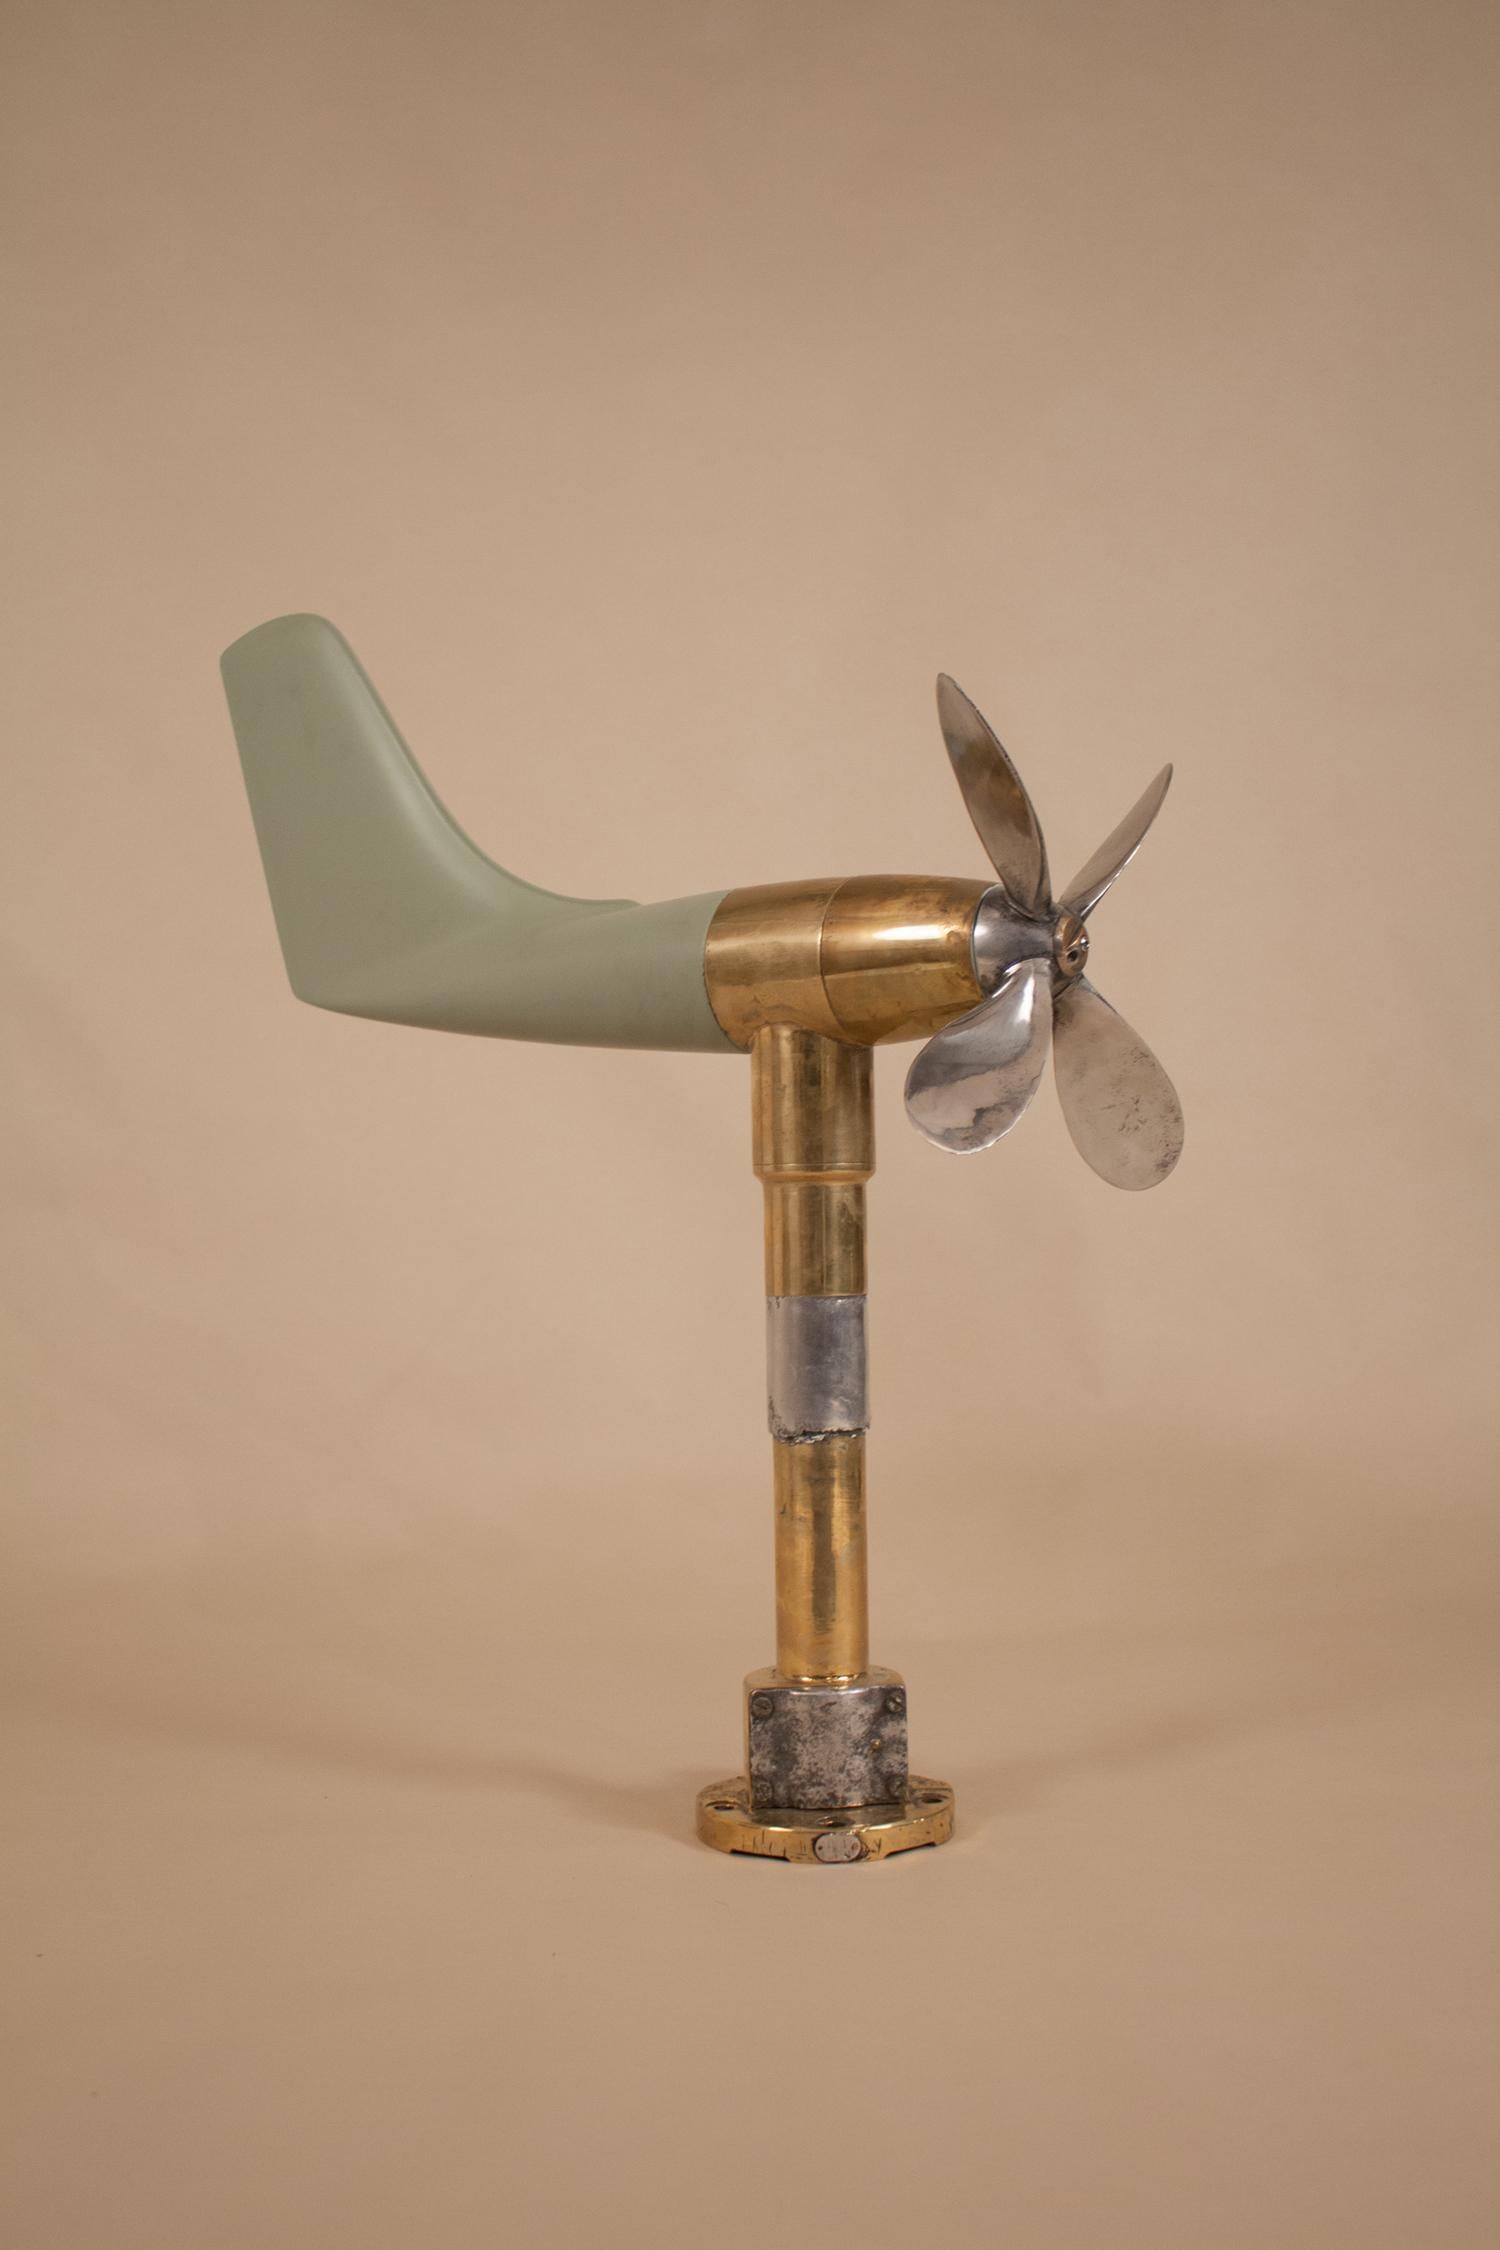 This 1950s anemometer, originally wired and used to measure wind speed and direction on an airfield or boat, now makes a delightful Kinetic sculpture. Whether wind- or manually-driven, the aluminium propeller, brass shaft and restored fiberglass